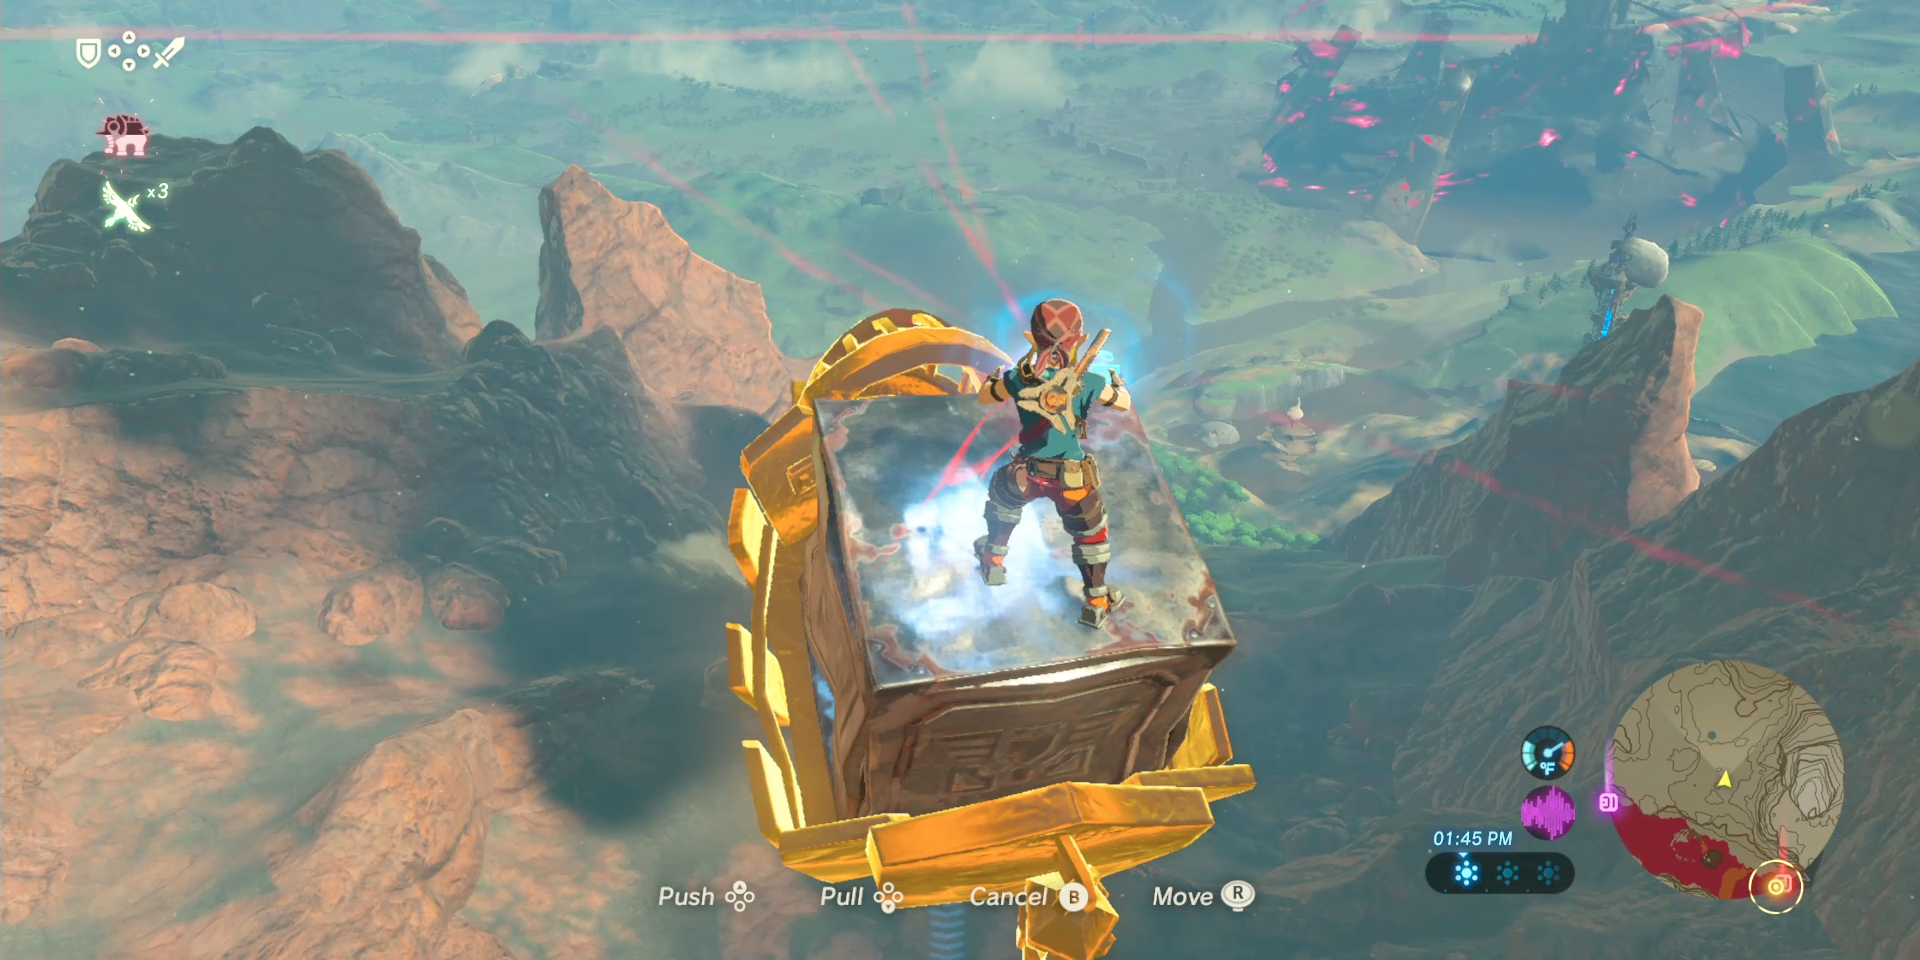 Link Flying Minecart Breath of the Wild